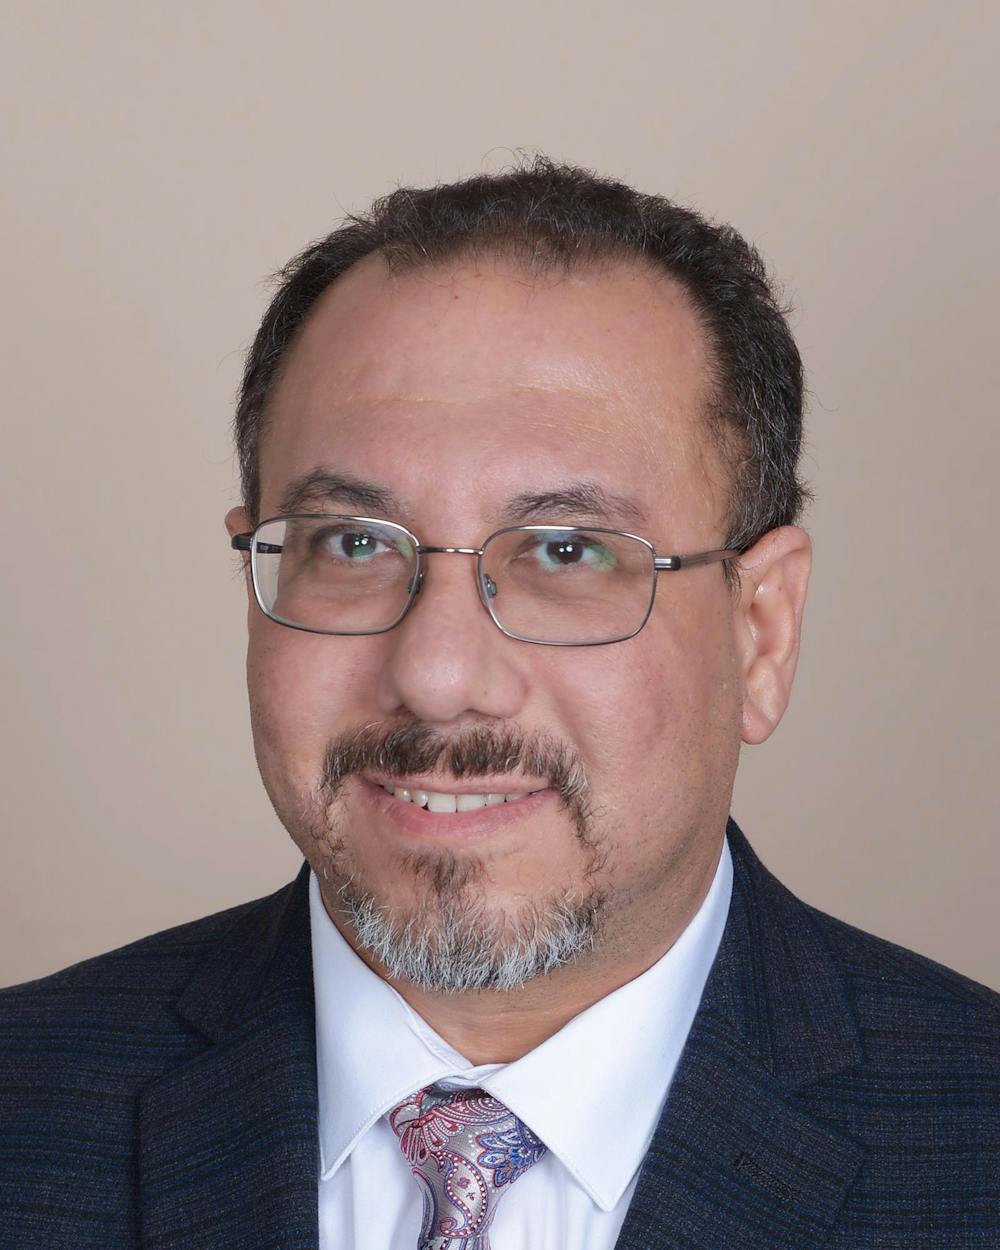 <p>College of Human Medicine Director of the Division of Psychiatry and Behavior Medicine Dr. Nagy Youssef. Courtesy of Nagy Youssef.</p>